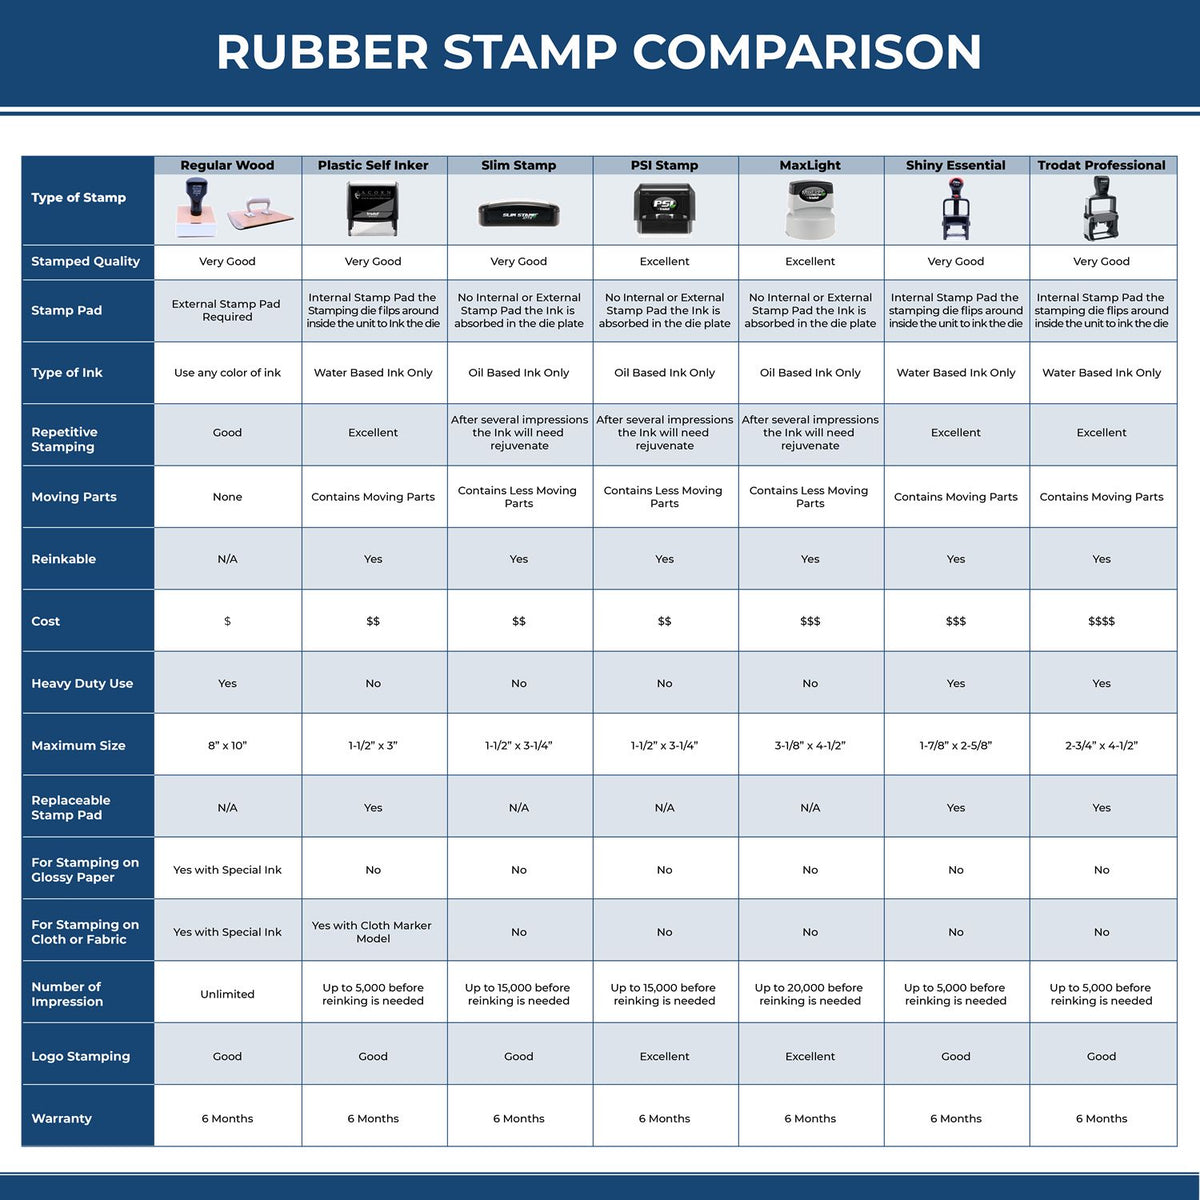 A comparison chart for the different types of mount models available for the Self-Inking Guam PE Stamp.